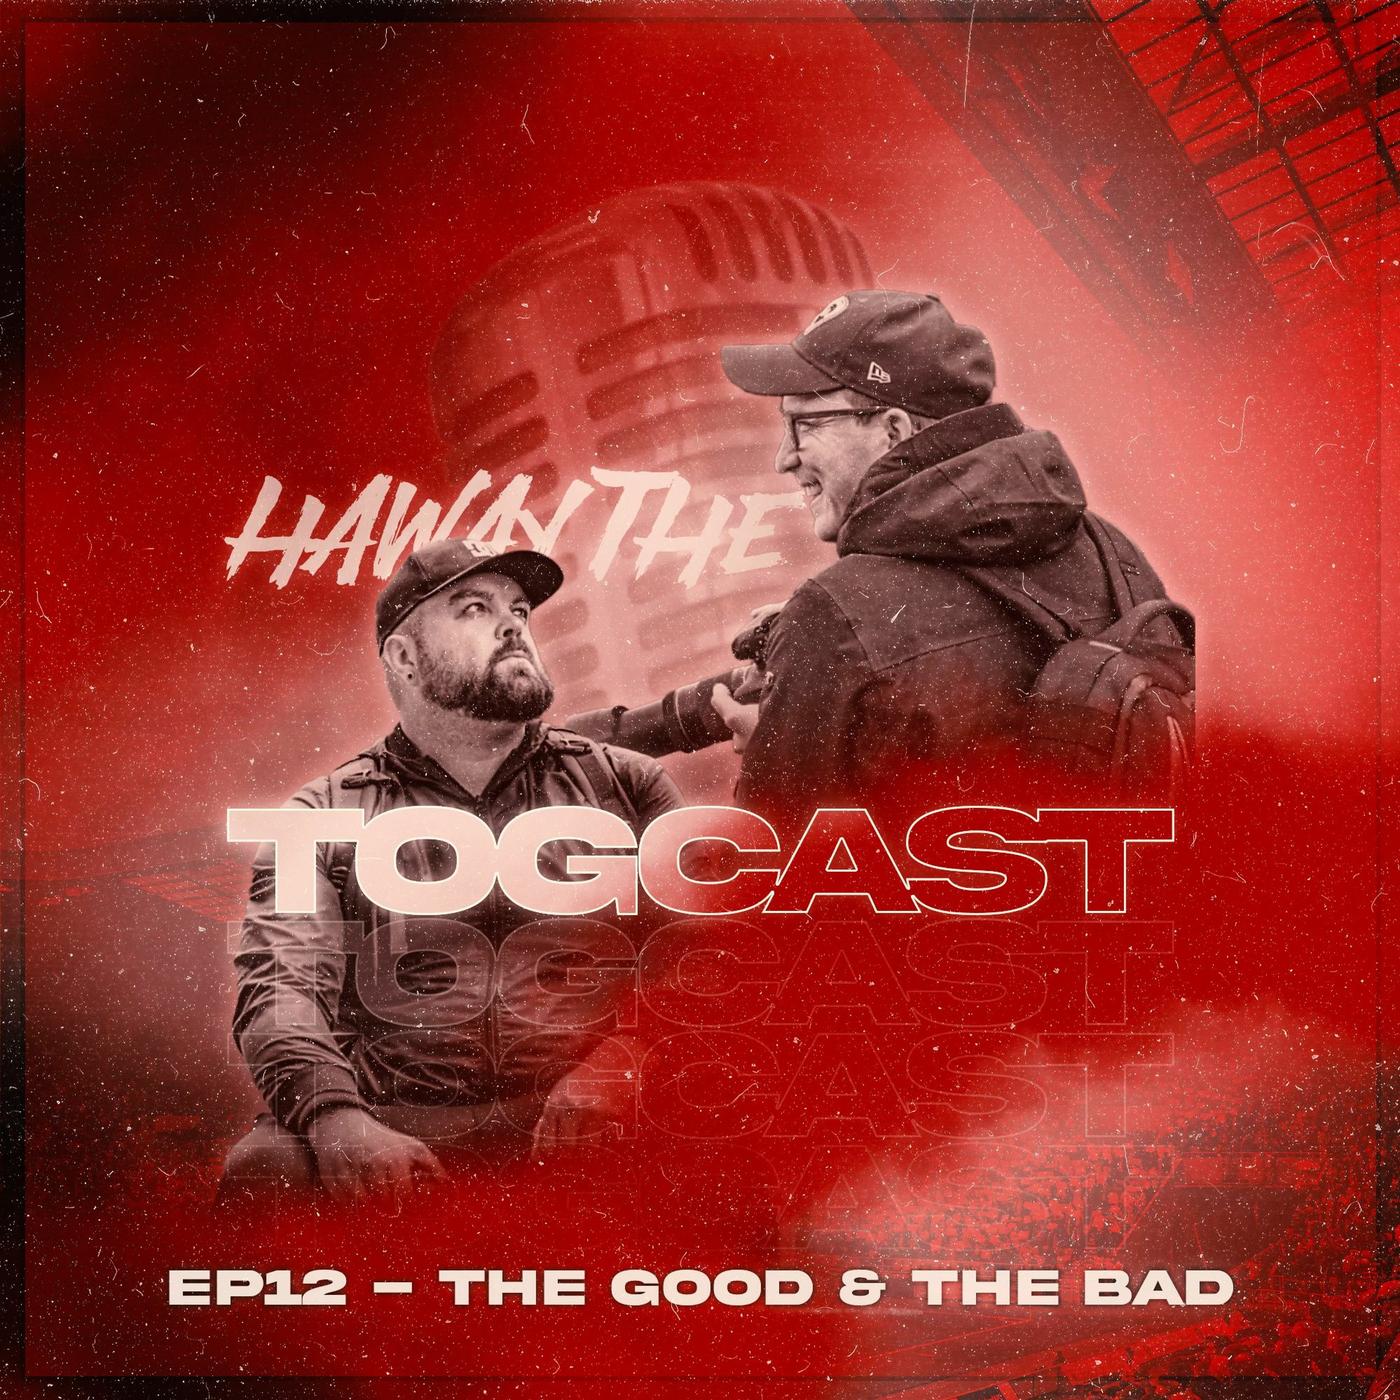 EP 13 | Batten Down The Hatches! | Storm Chasing - Haway The Togcast ...